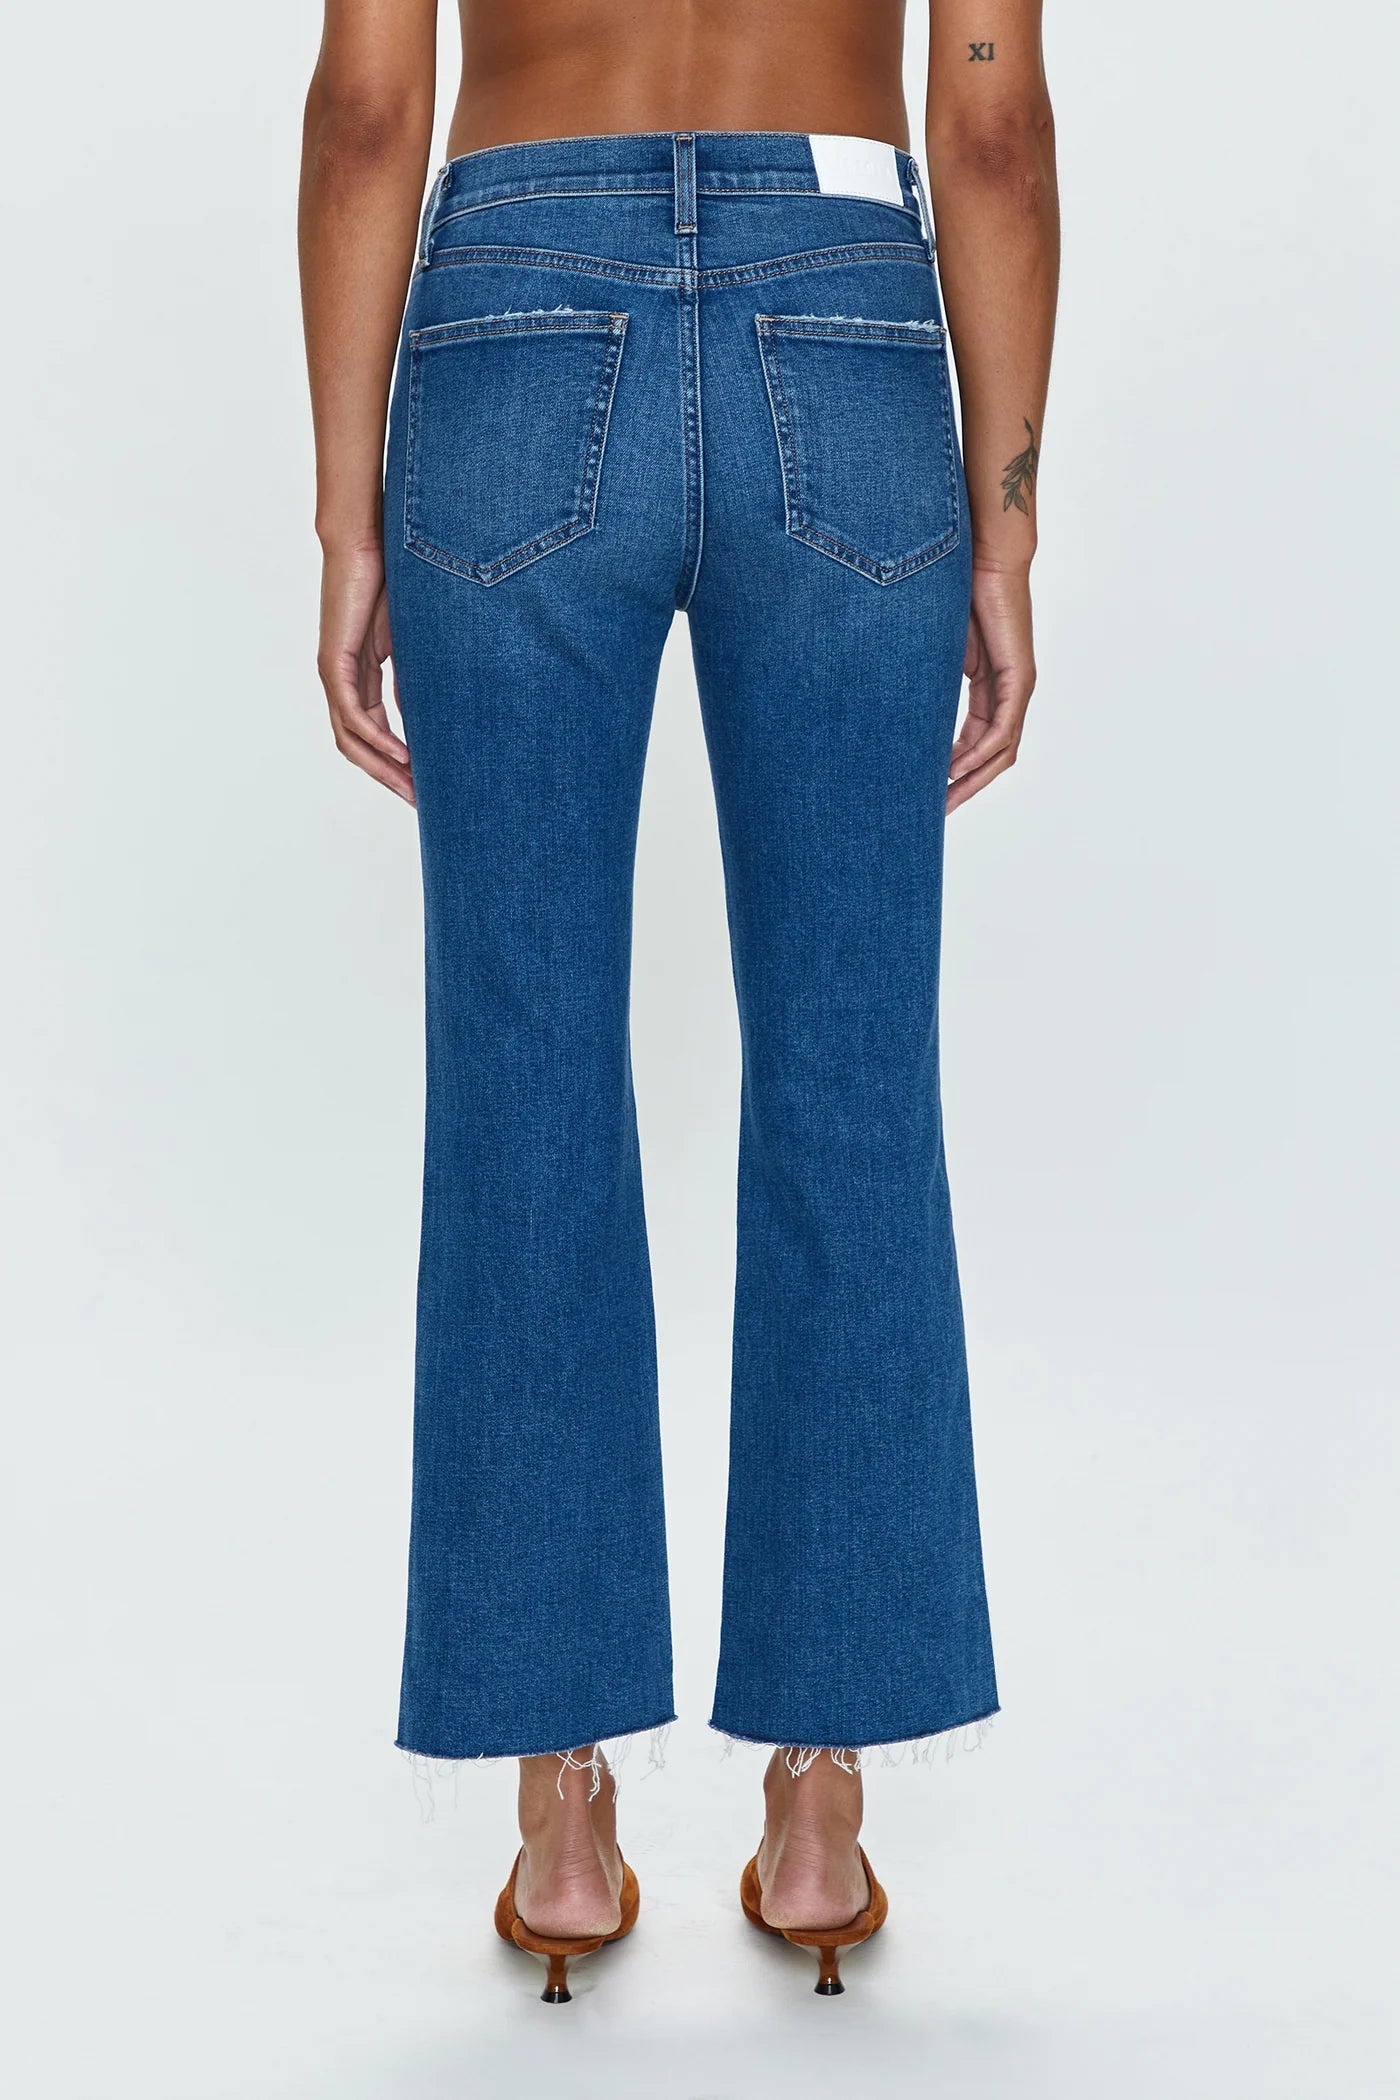 Back view of woman wearing medium wash high rise cropped bootcut jeans by Pistola